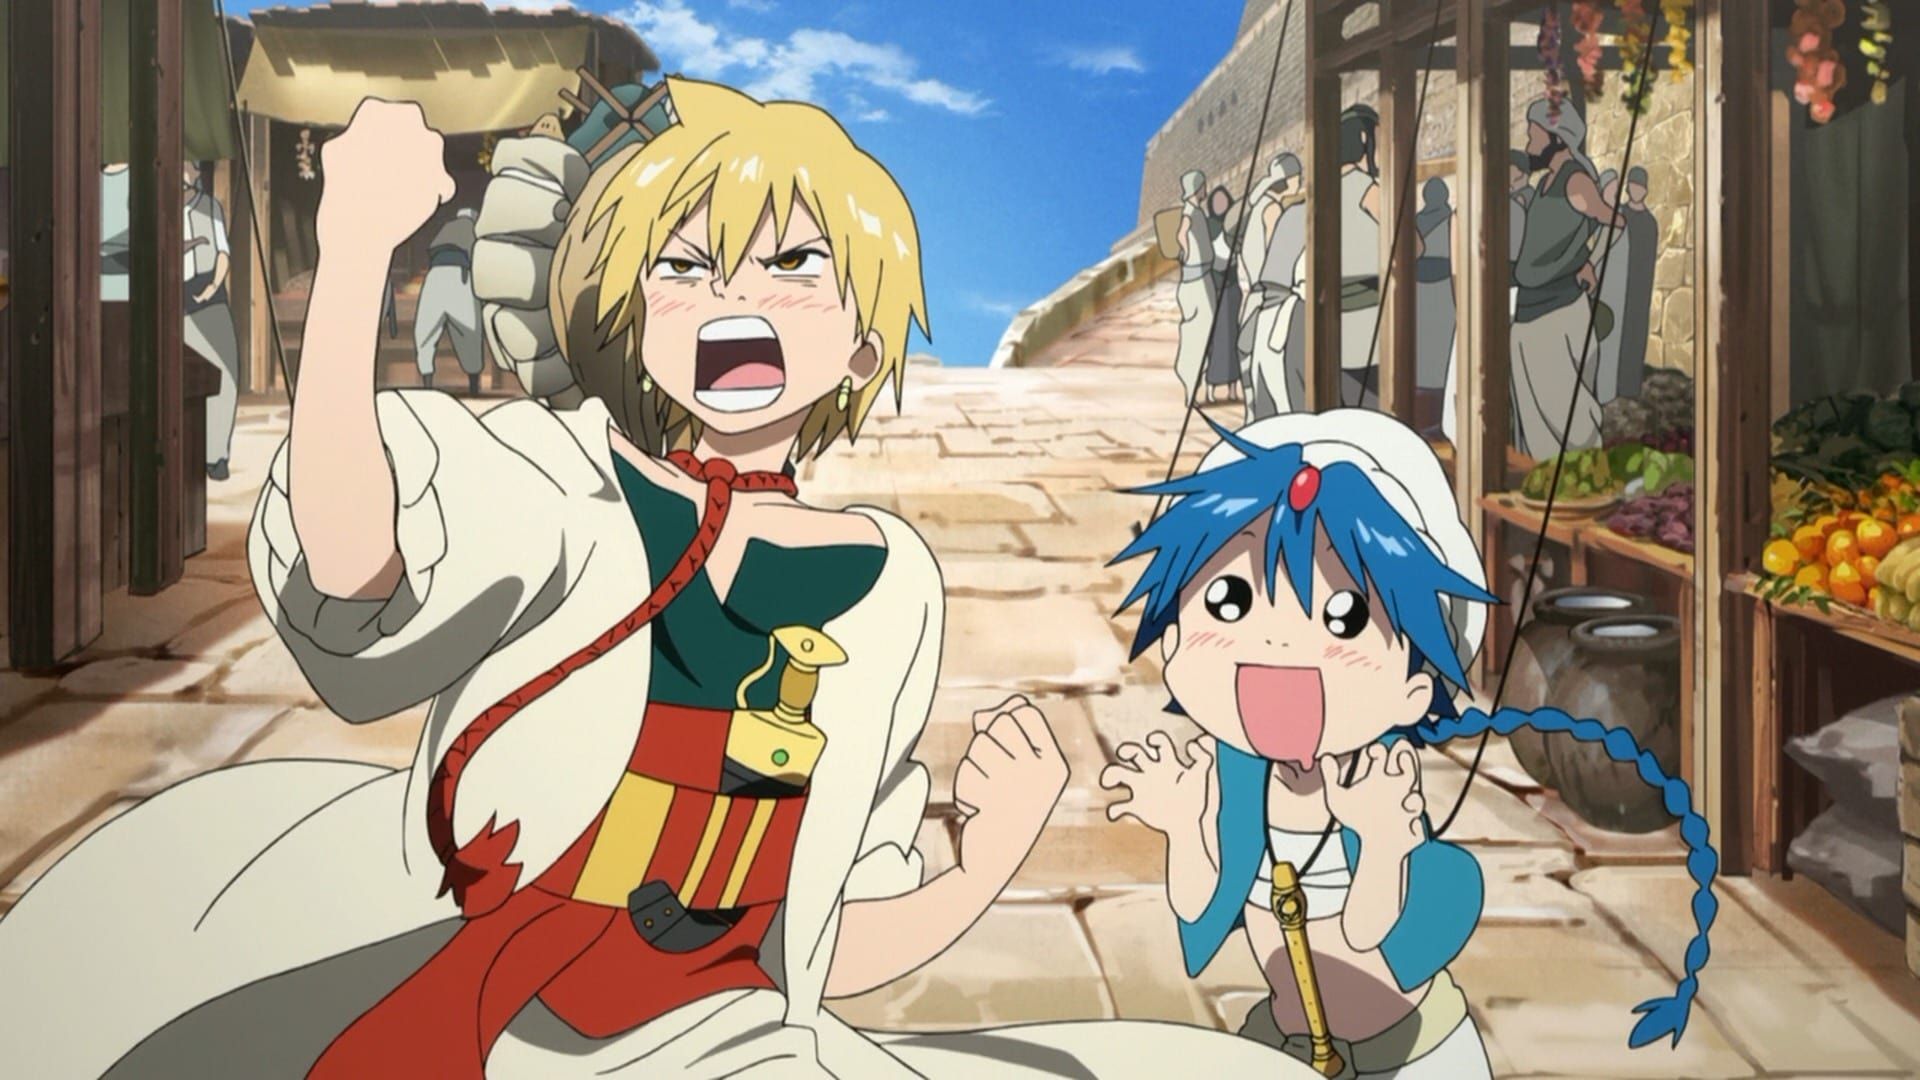 Magi: The Labyrinth of Magic: Where to Watch and Stream Online